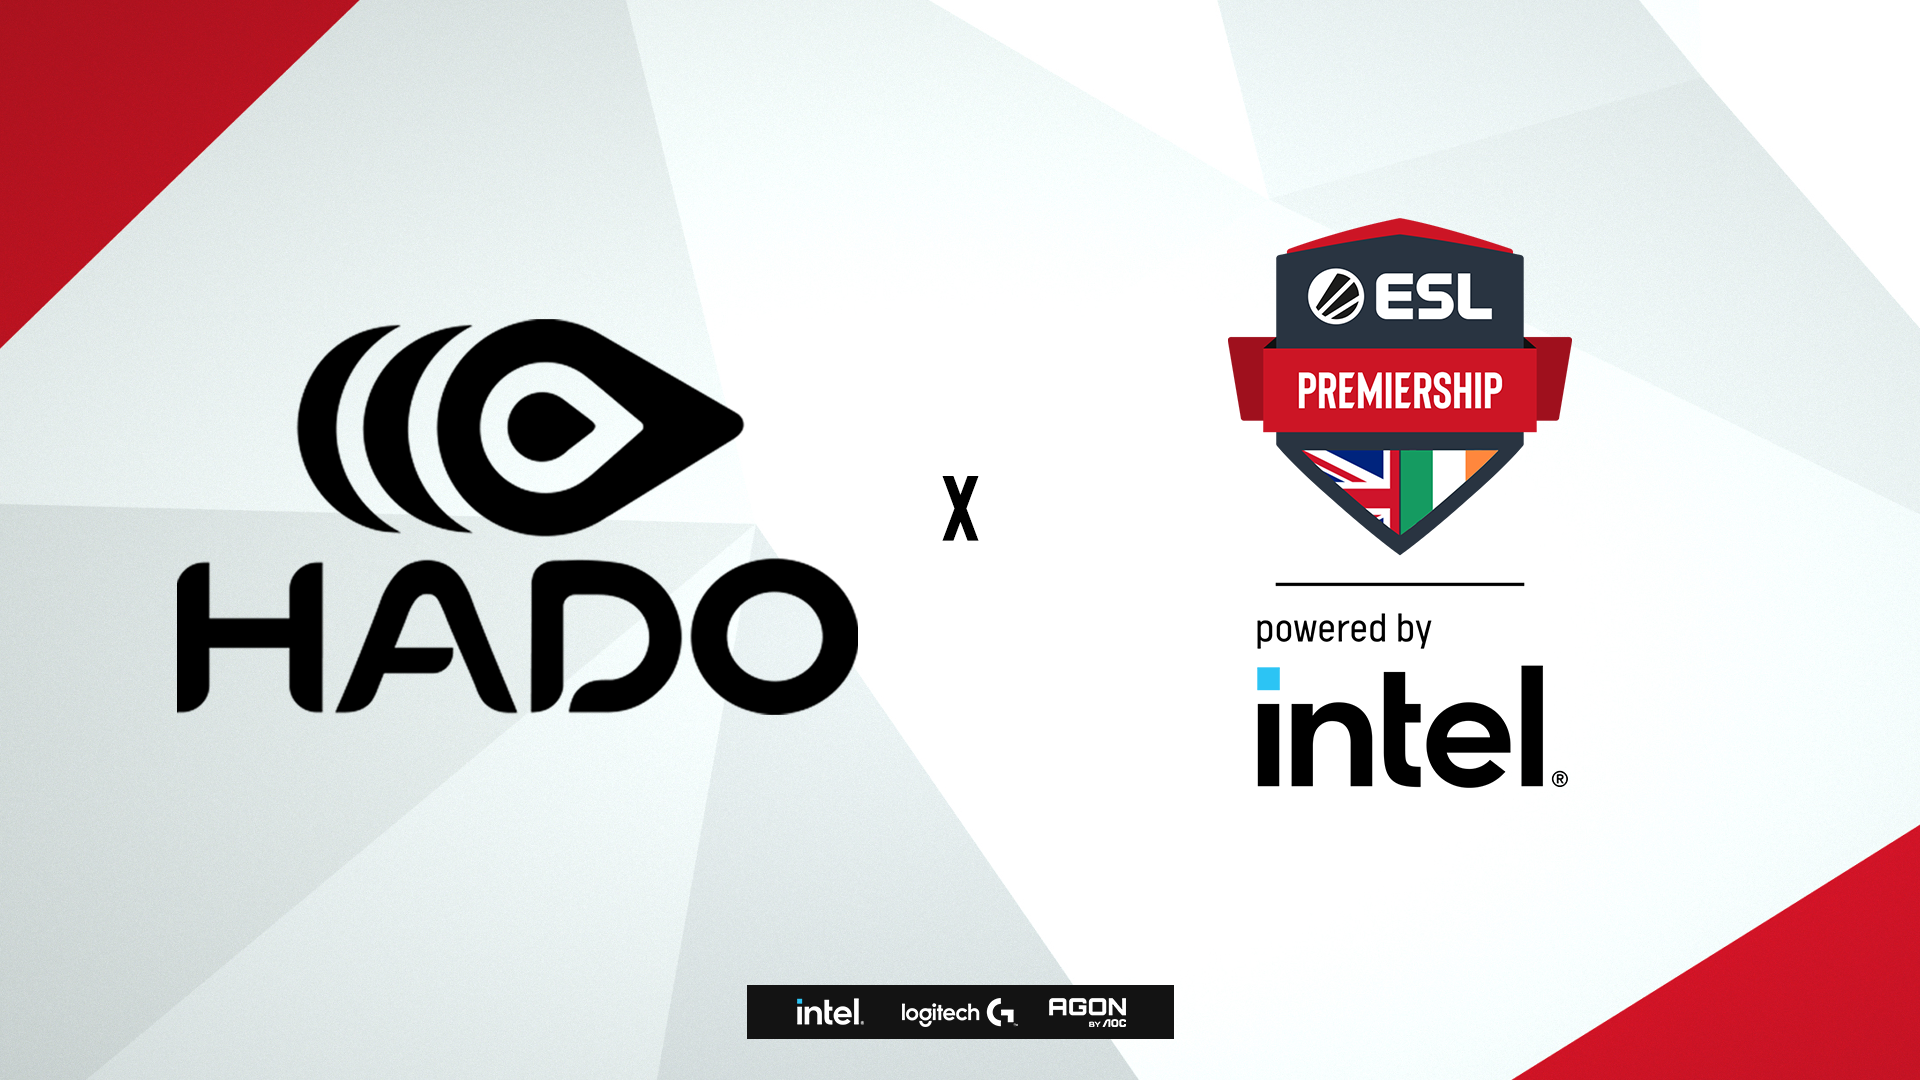 ESL UK Introduces Augmented Reality Game HADO to the ESL Premiership, debuts with Invitational Tournament at Insomnia 68